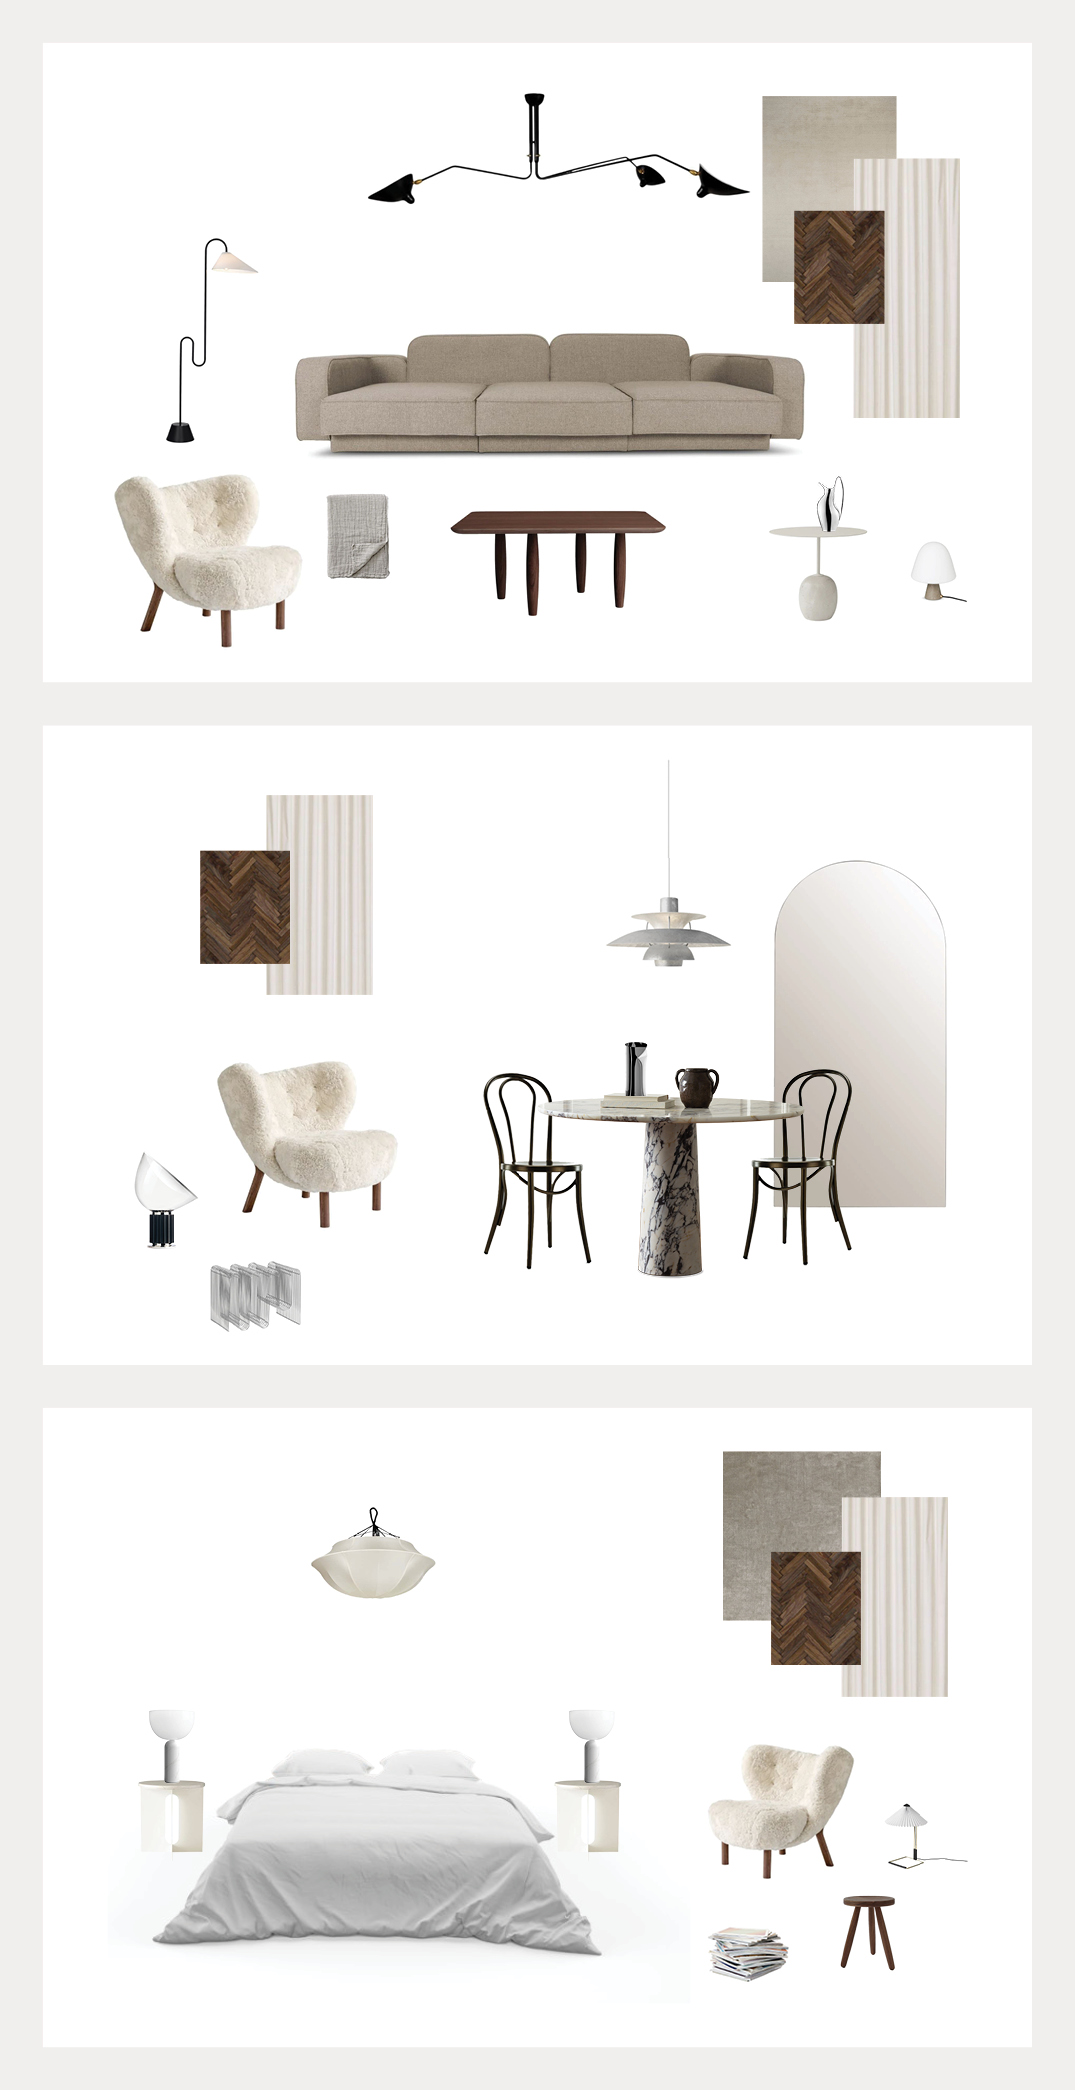 Room Planning Moodboard - Timeless Interior Design Aesthetic - RG Daily